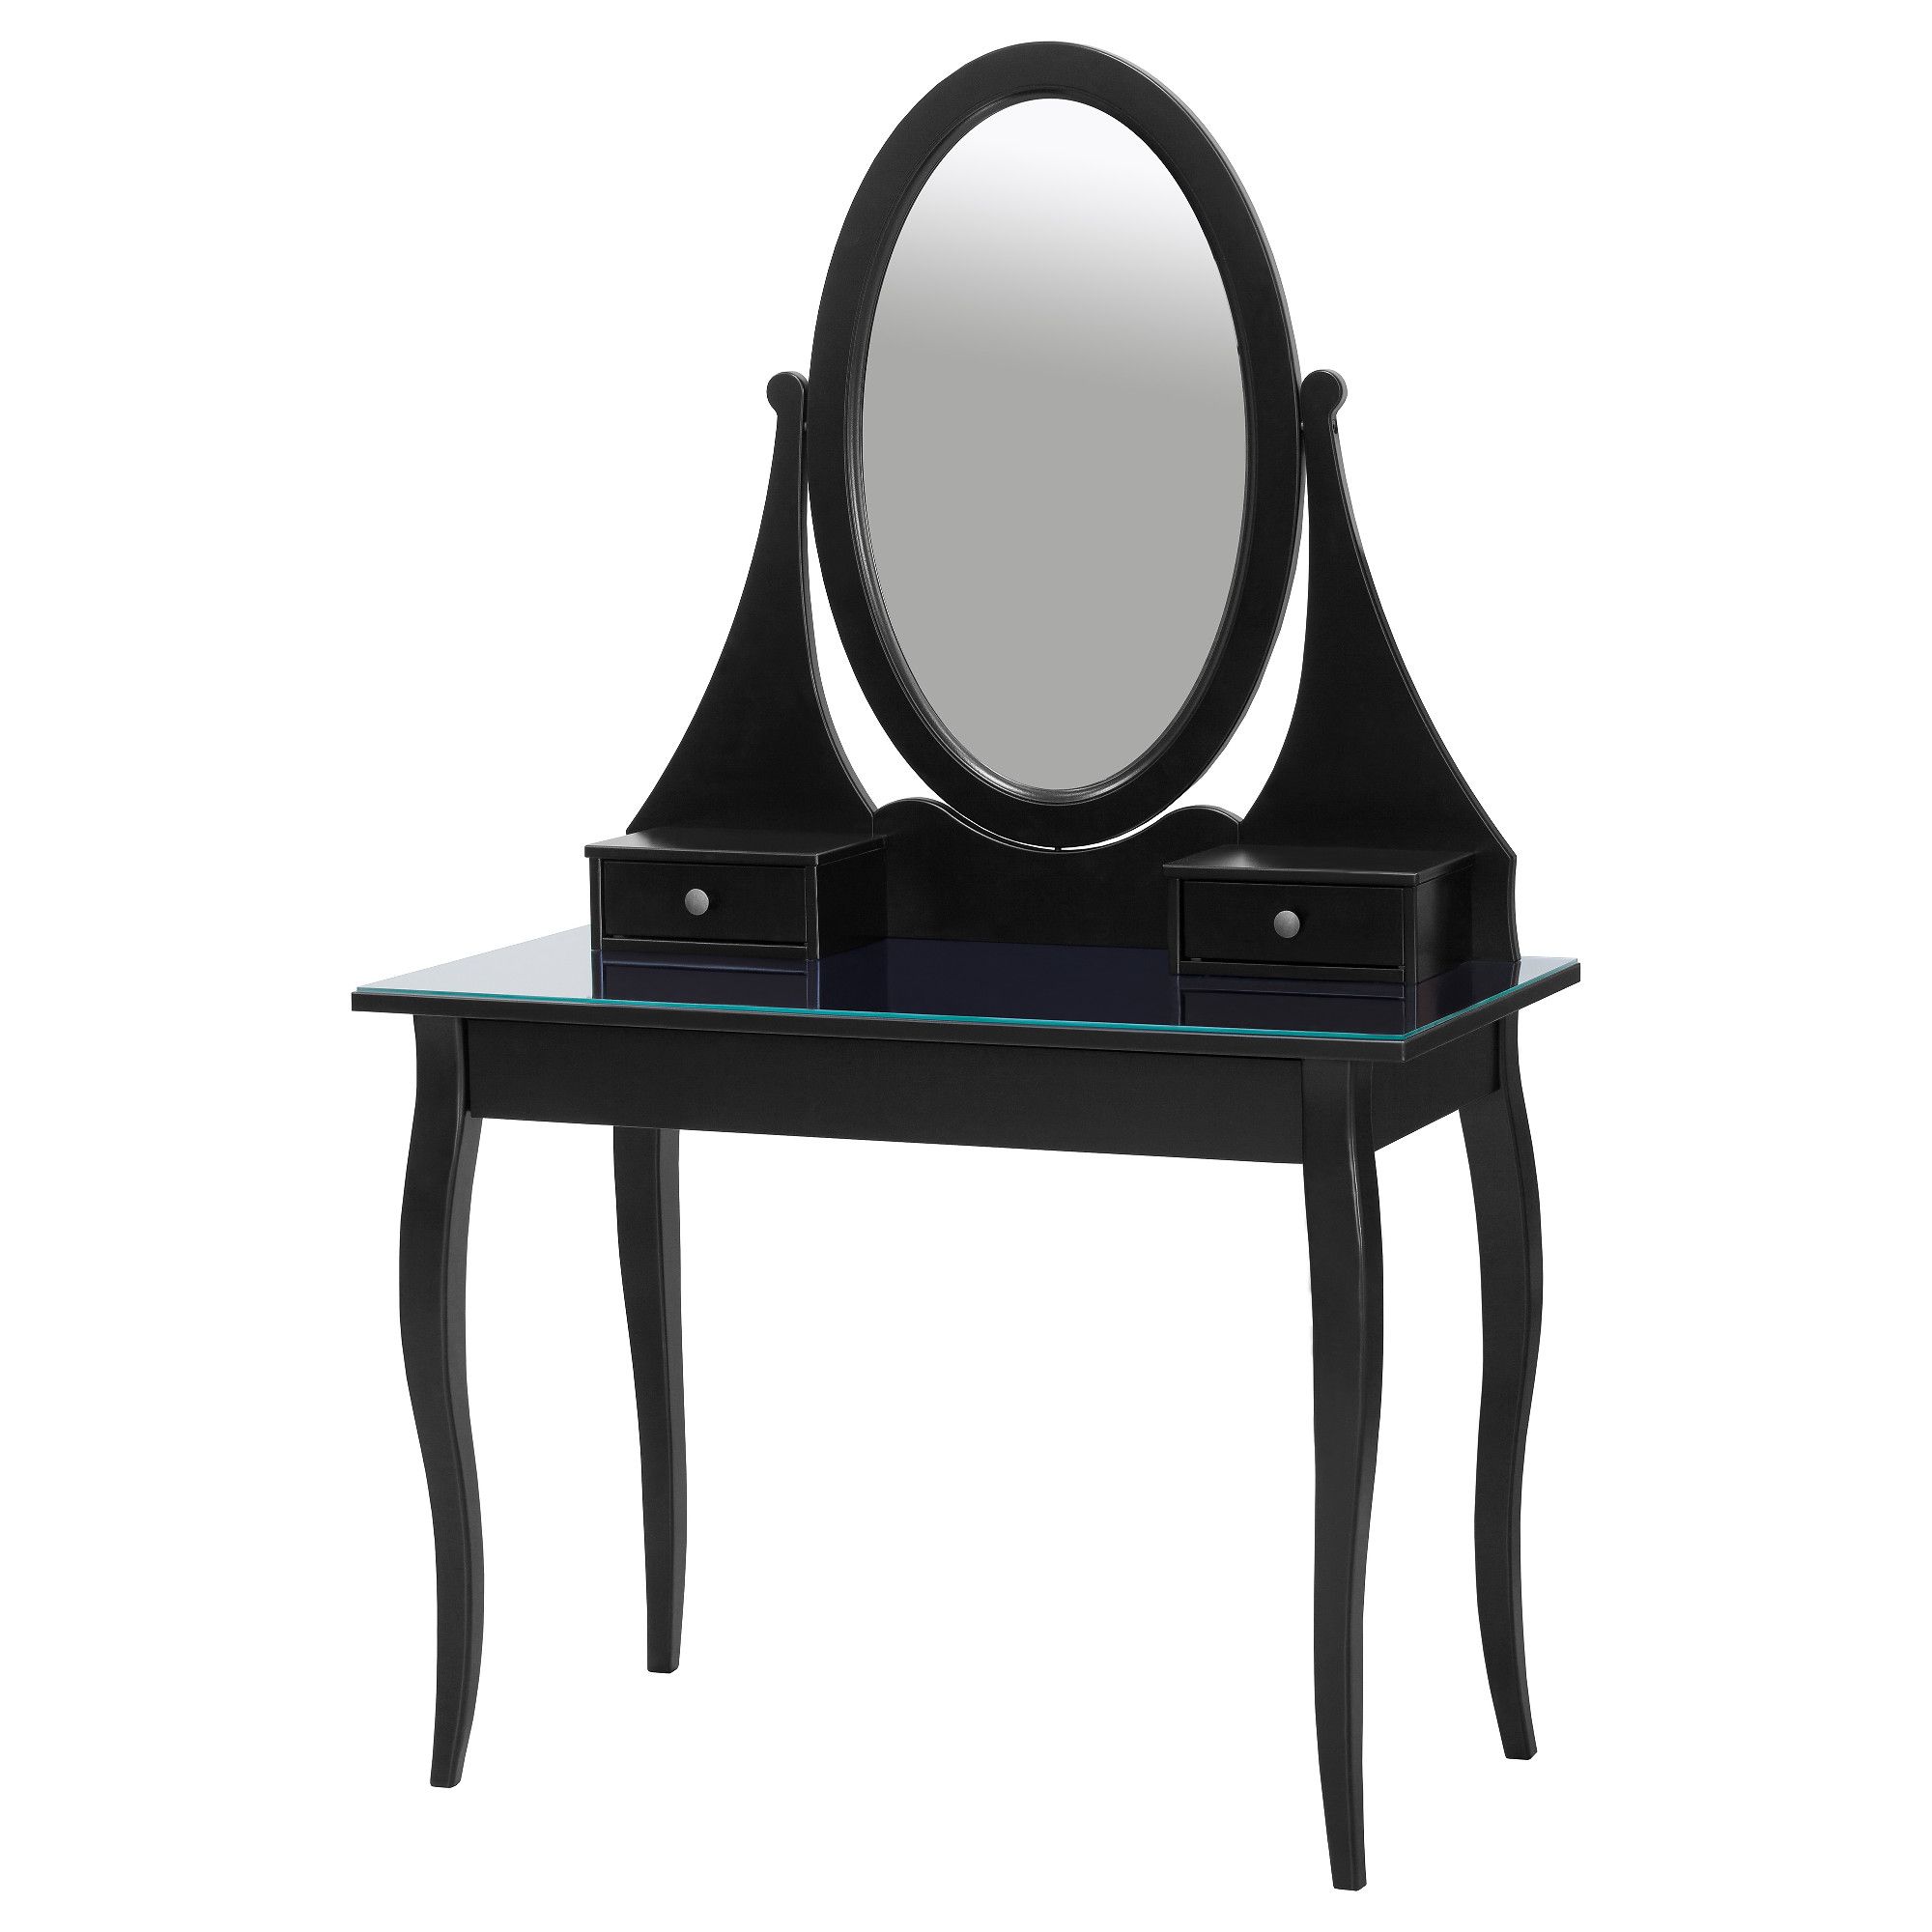 Awesome hemnes dressing table with mirror black ikea image modern vanity xxx prestige for style and diy popular